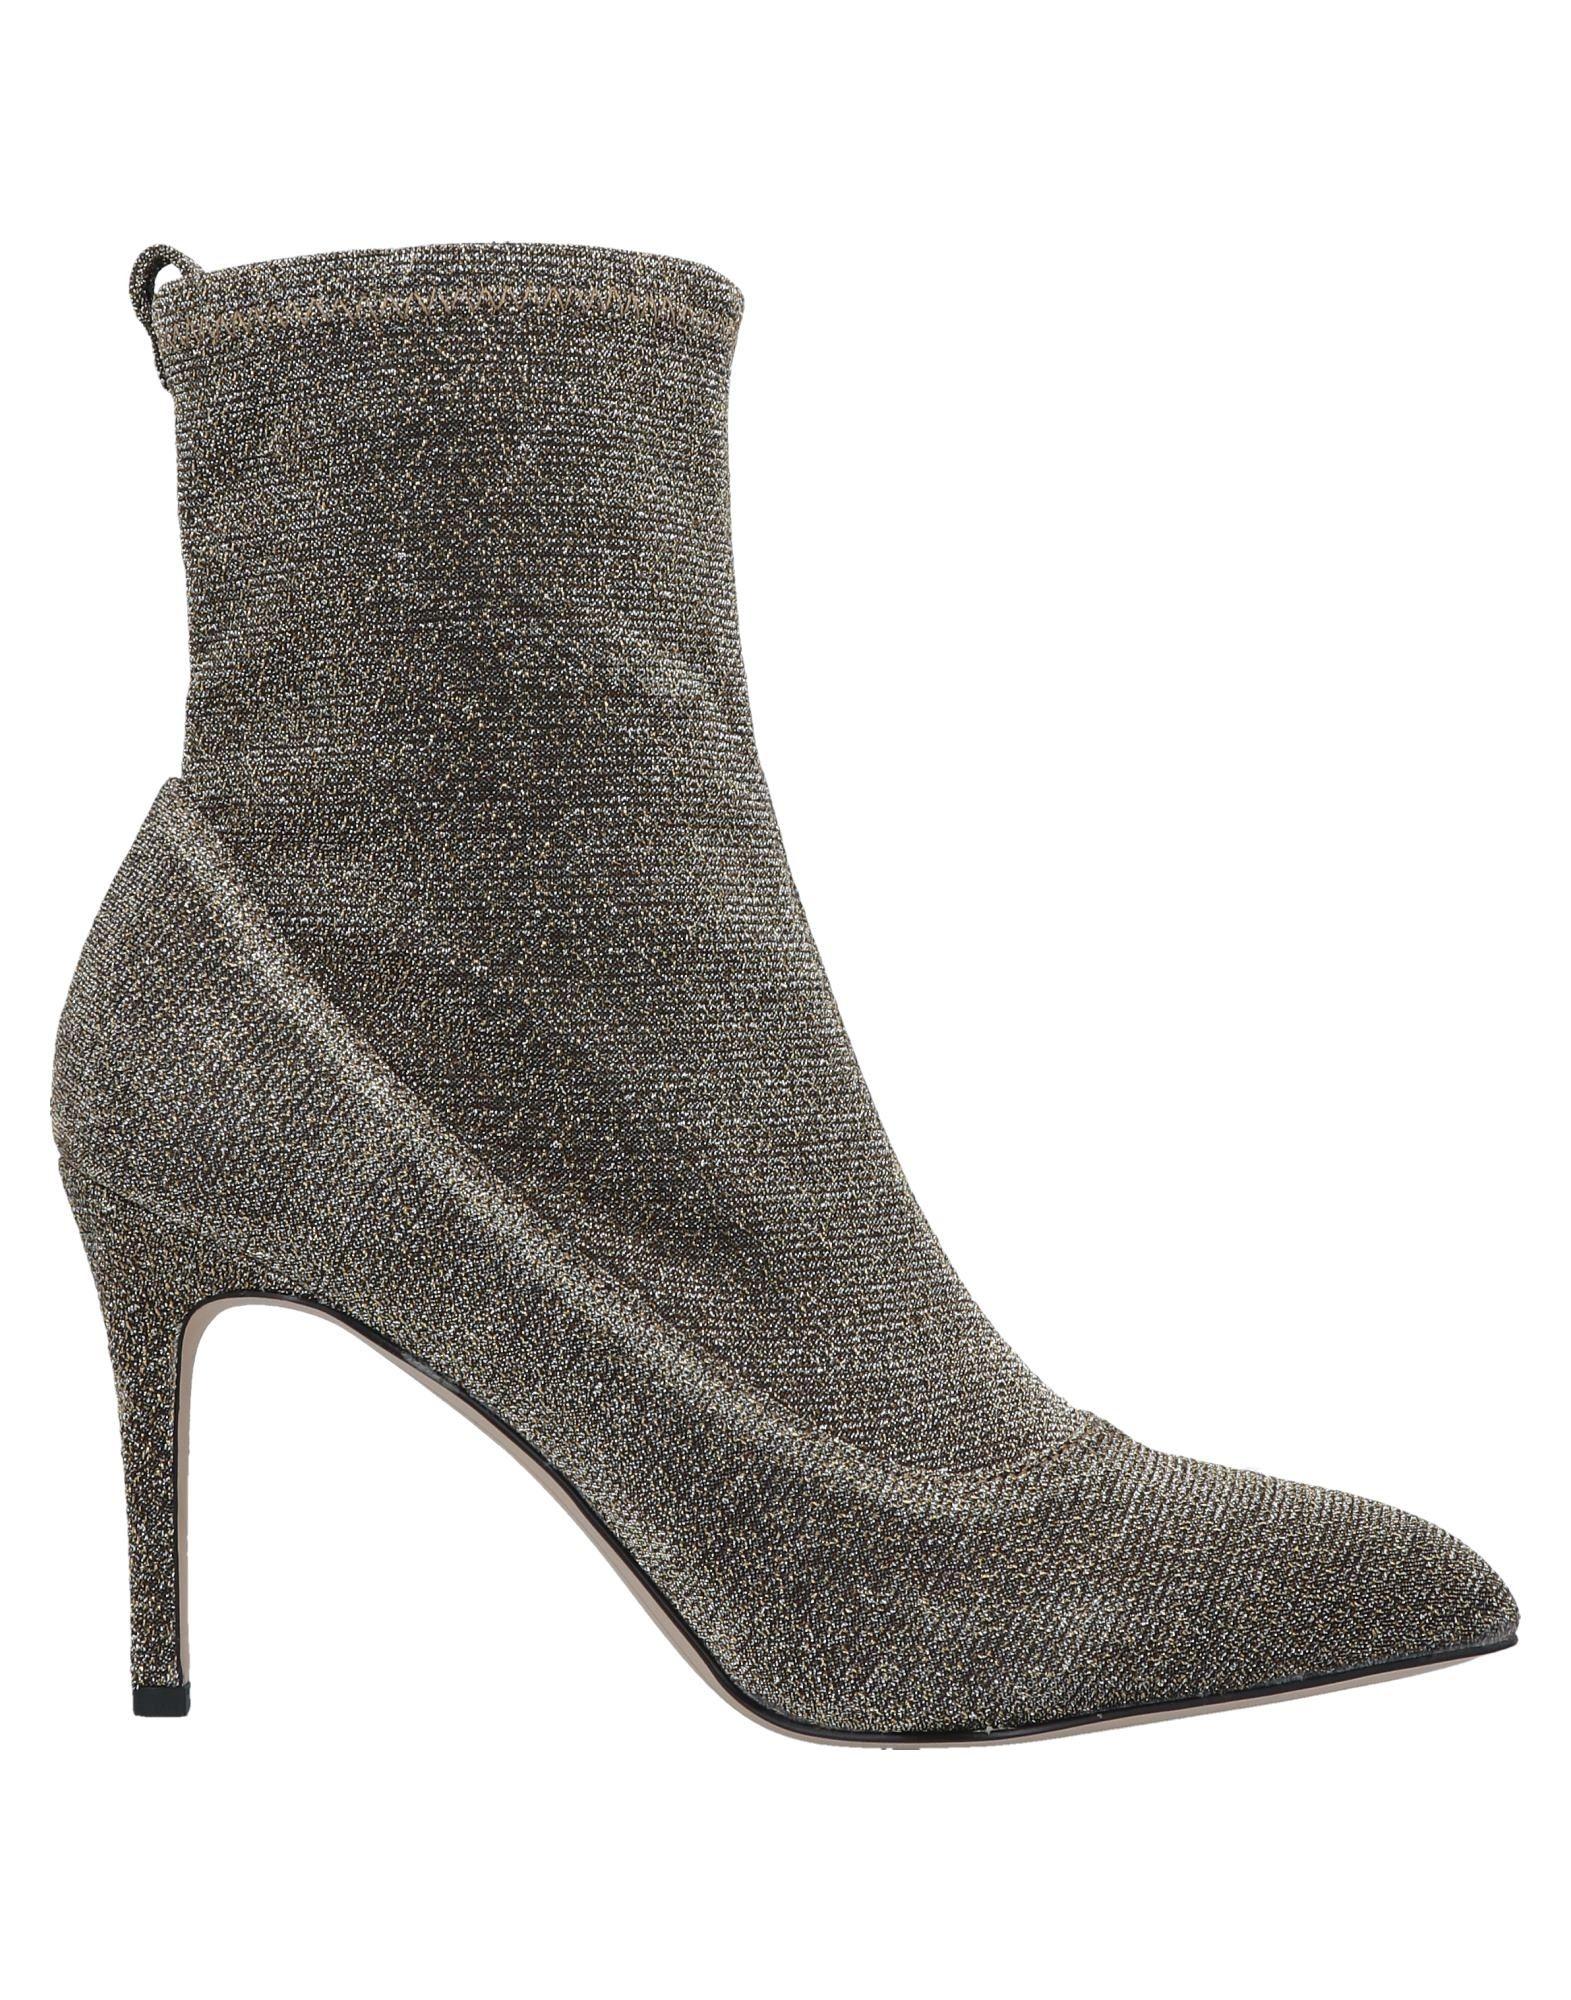 Sam Edelman Ankle Boots in Gold (Metallic) - Save 83% - Lyst